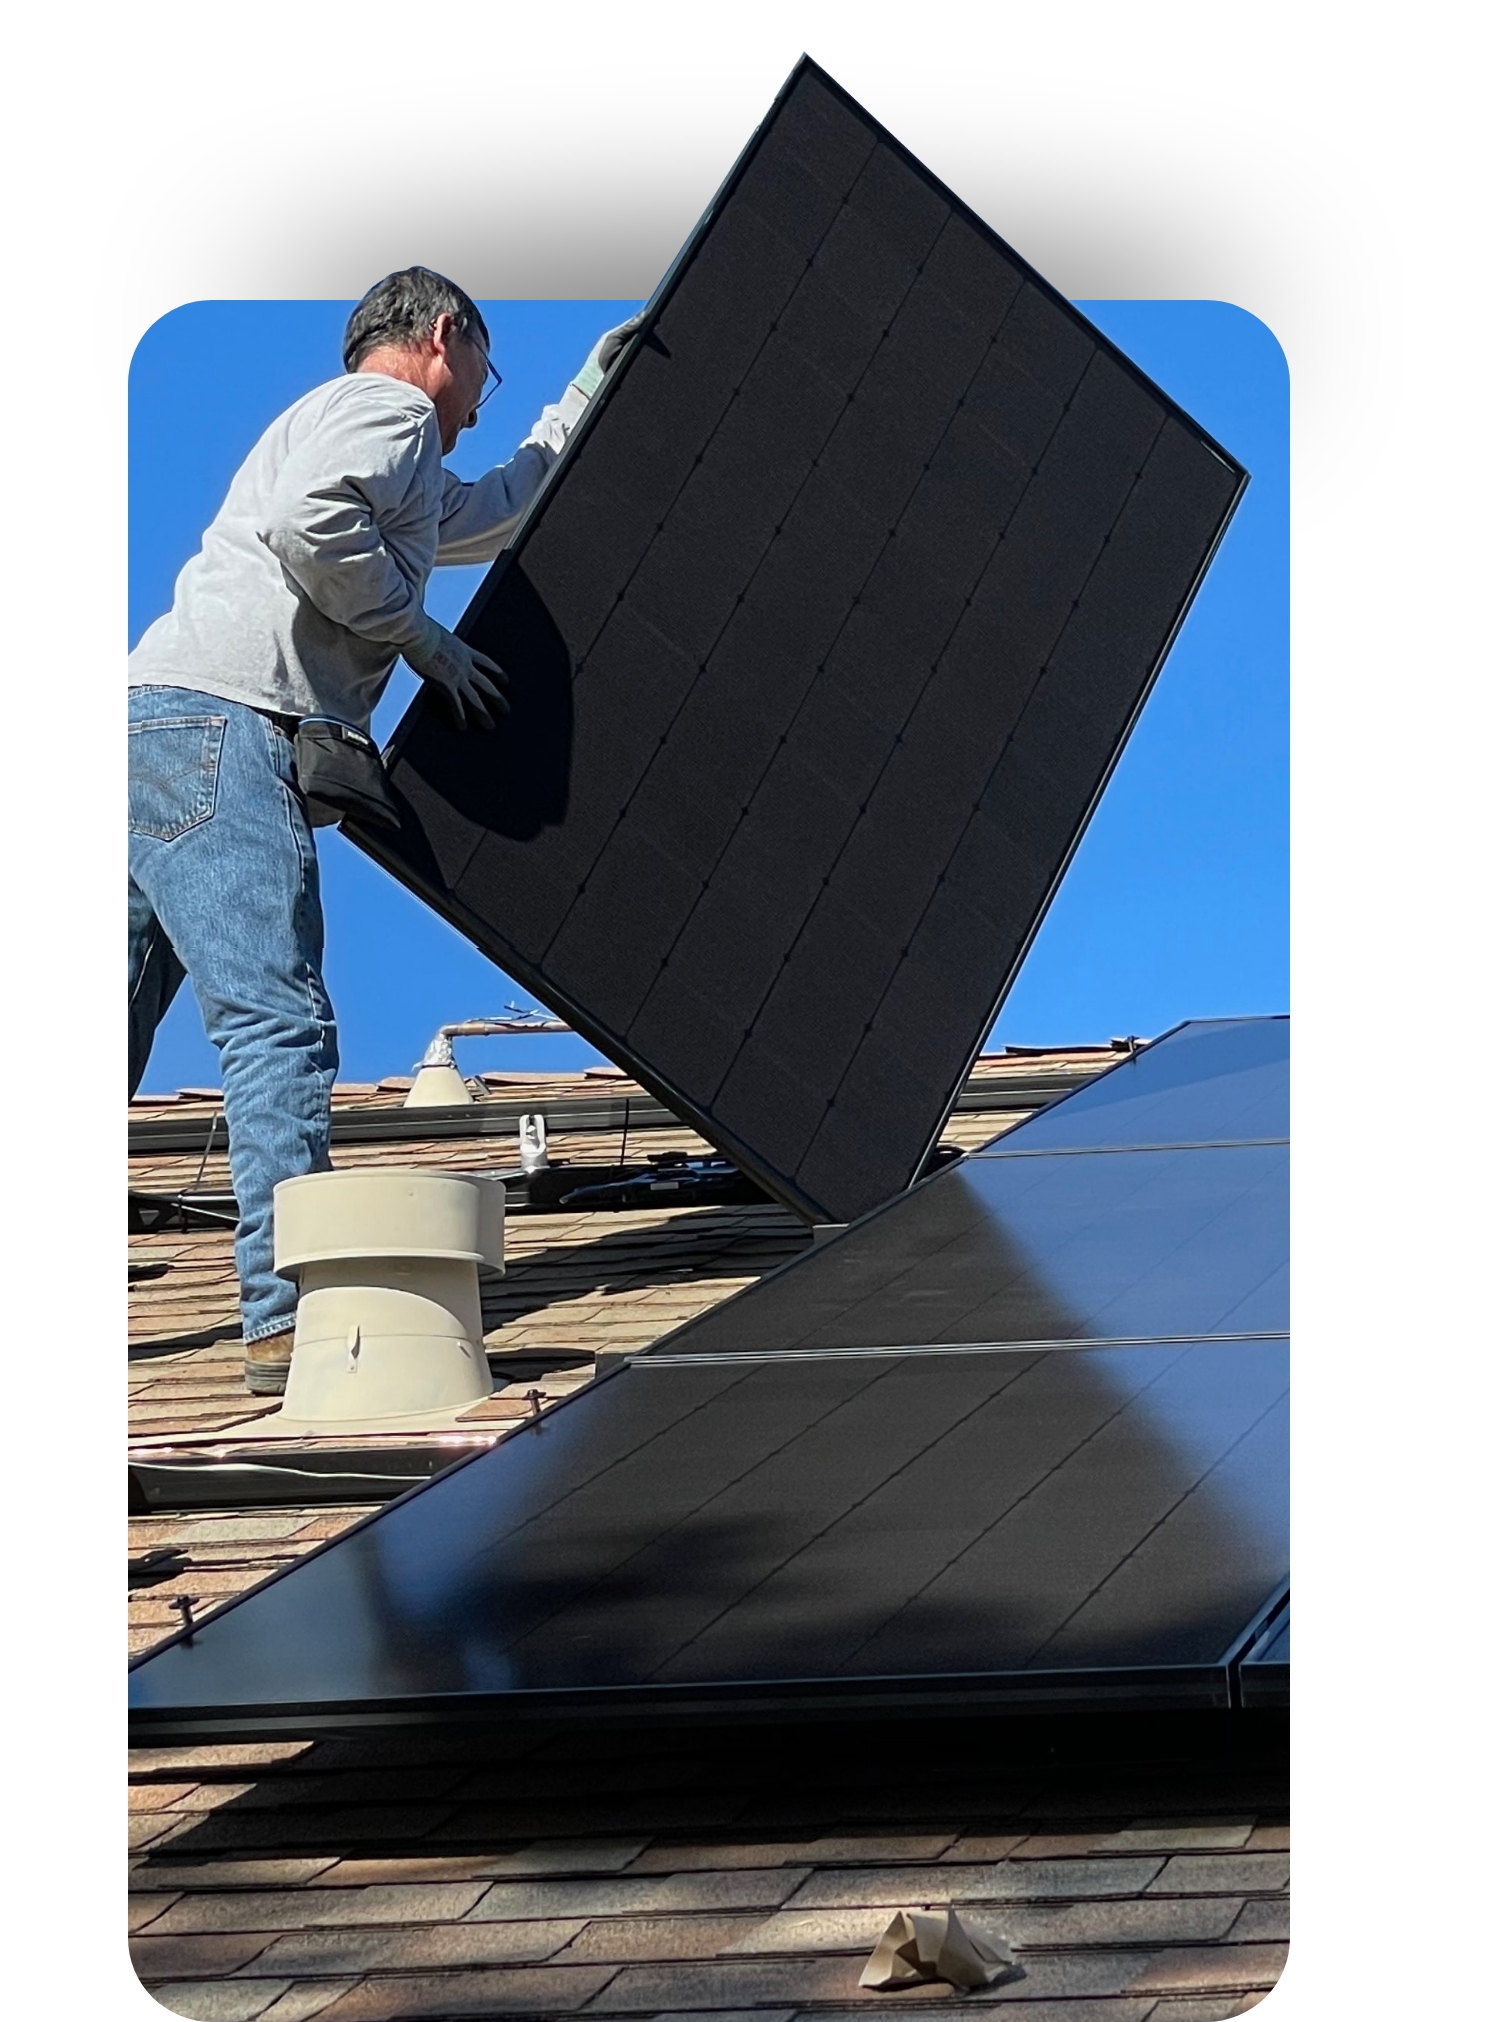 Control your own electricity with a solar panel installation in Arvada, CO. More solar panels are being installed to help people save money on electric bills. Get started today!